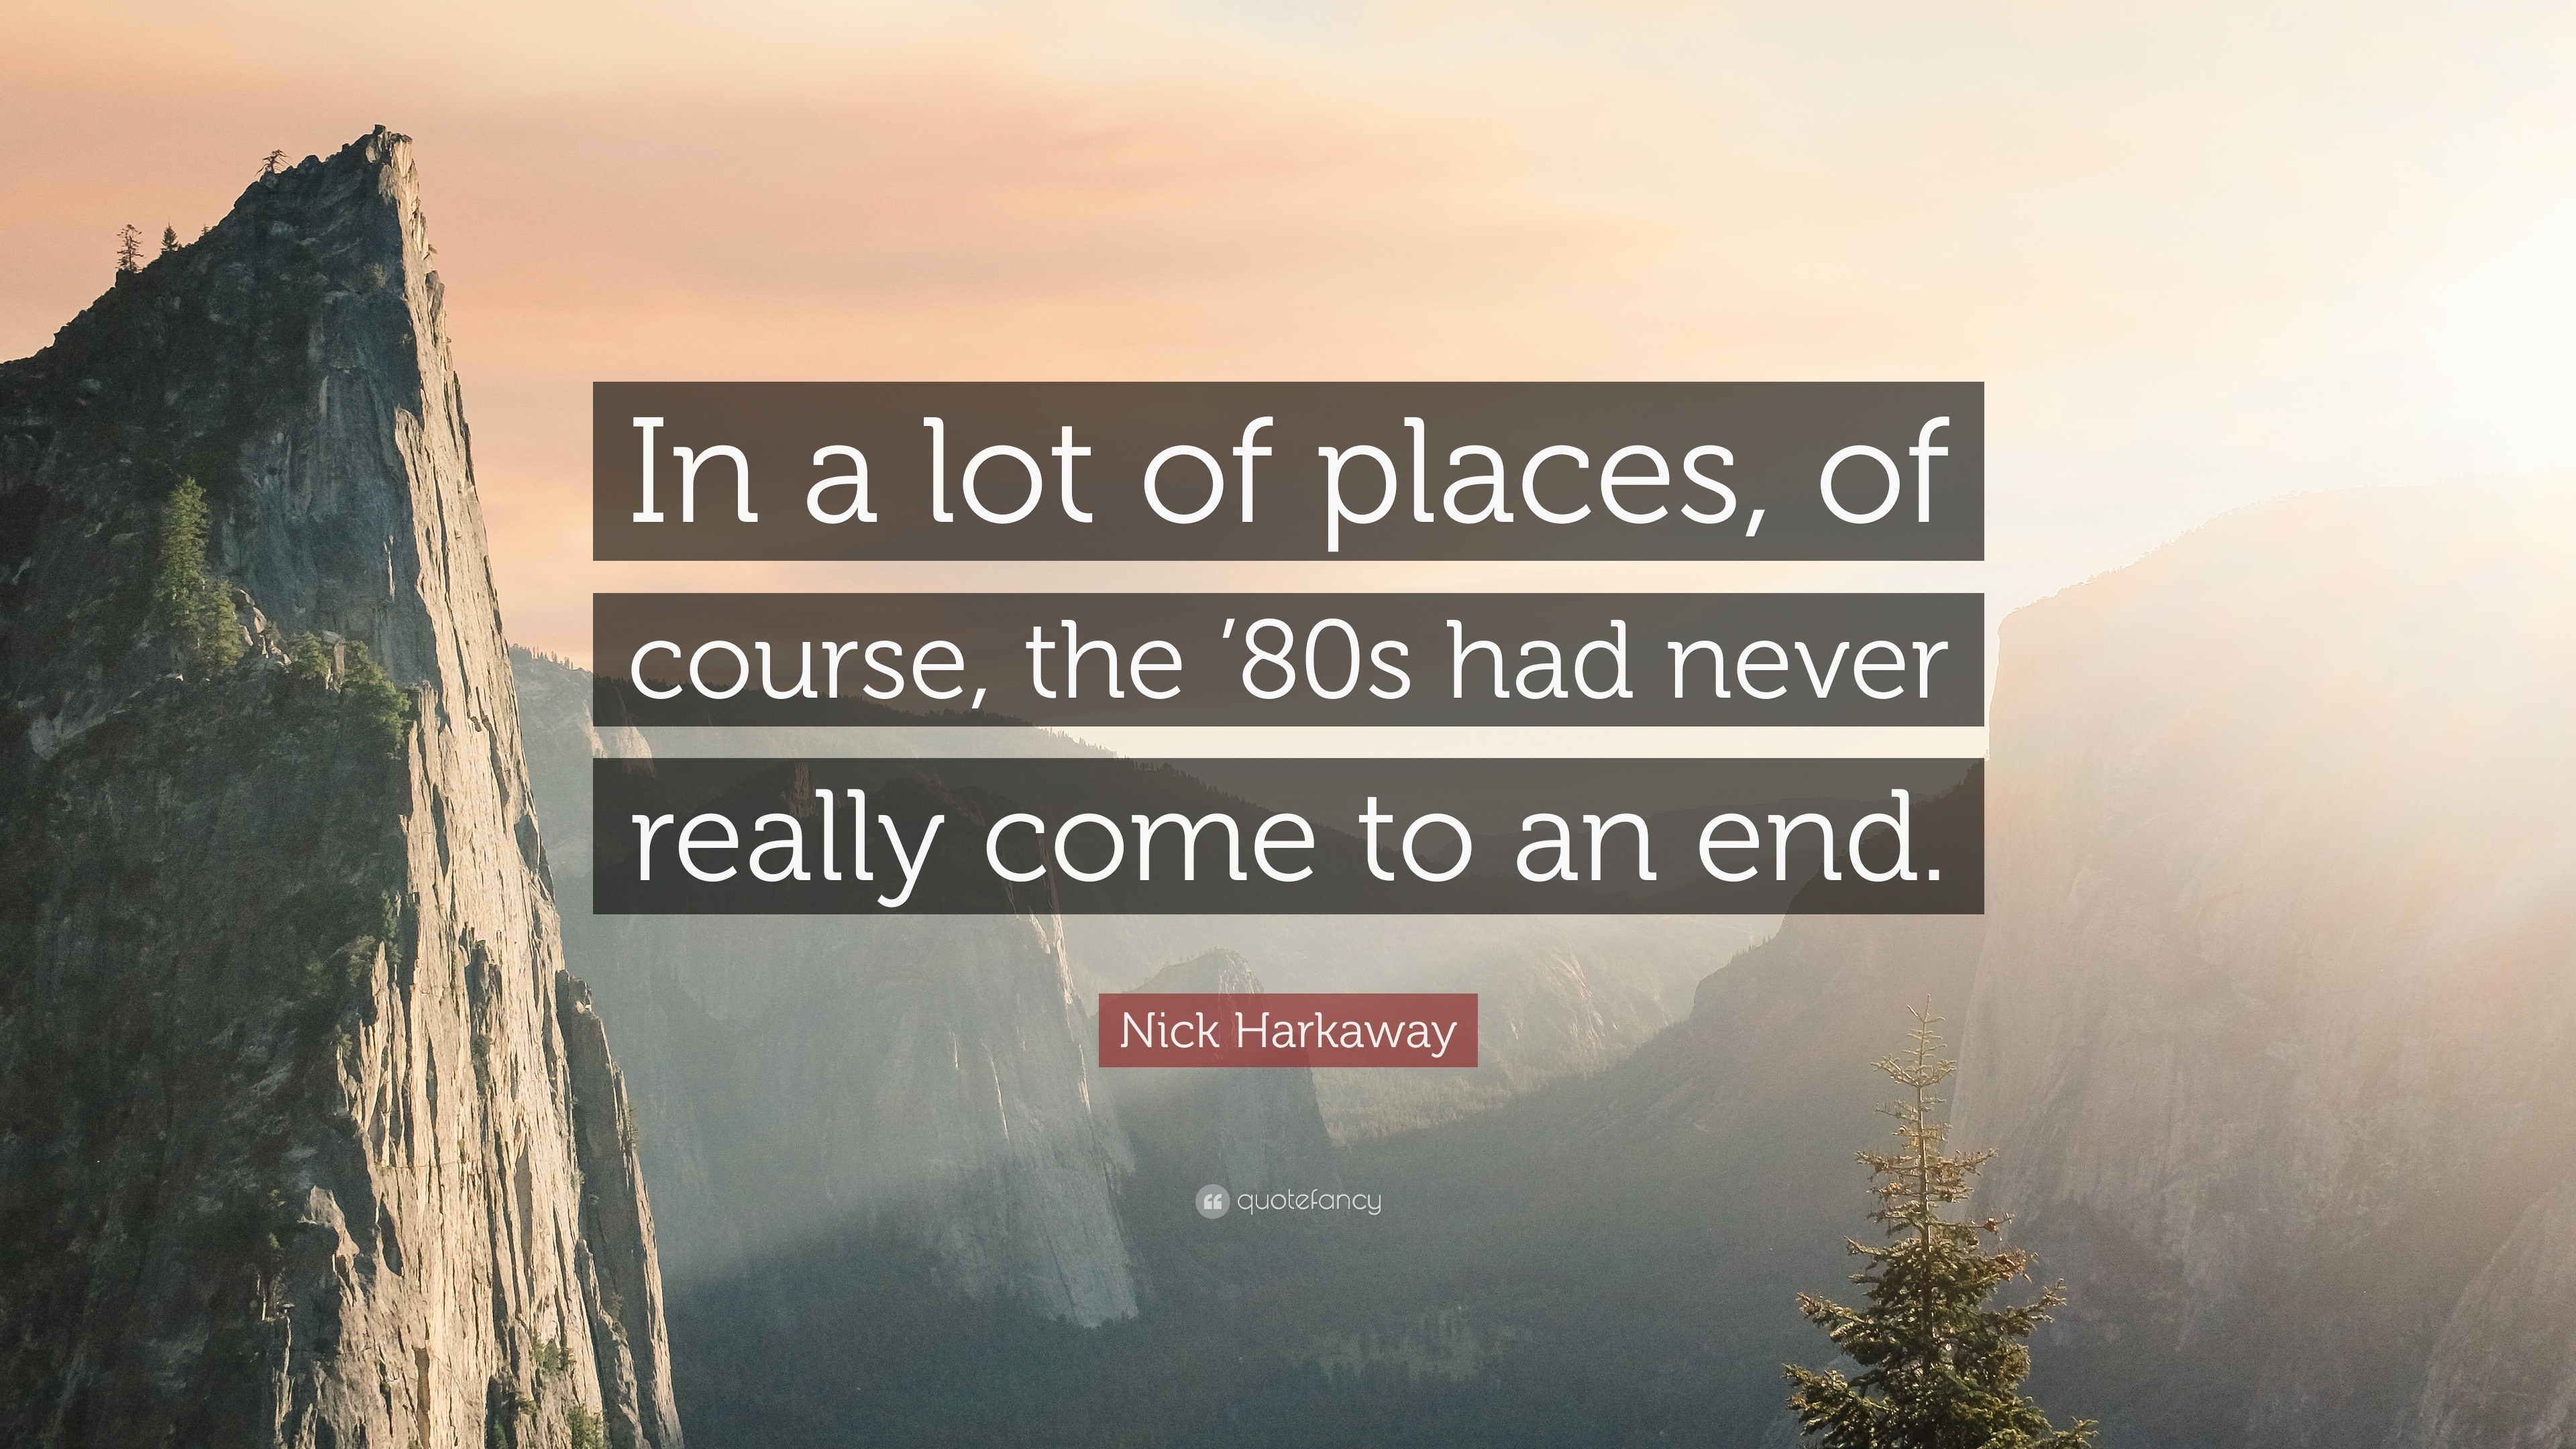 https://quotefancy.com/media/wallpaper/3840x2160/1296413-Nick-Harkaway-Quote-In-a-lot-of-places-of-course-the-80s-had-never.jpg